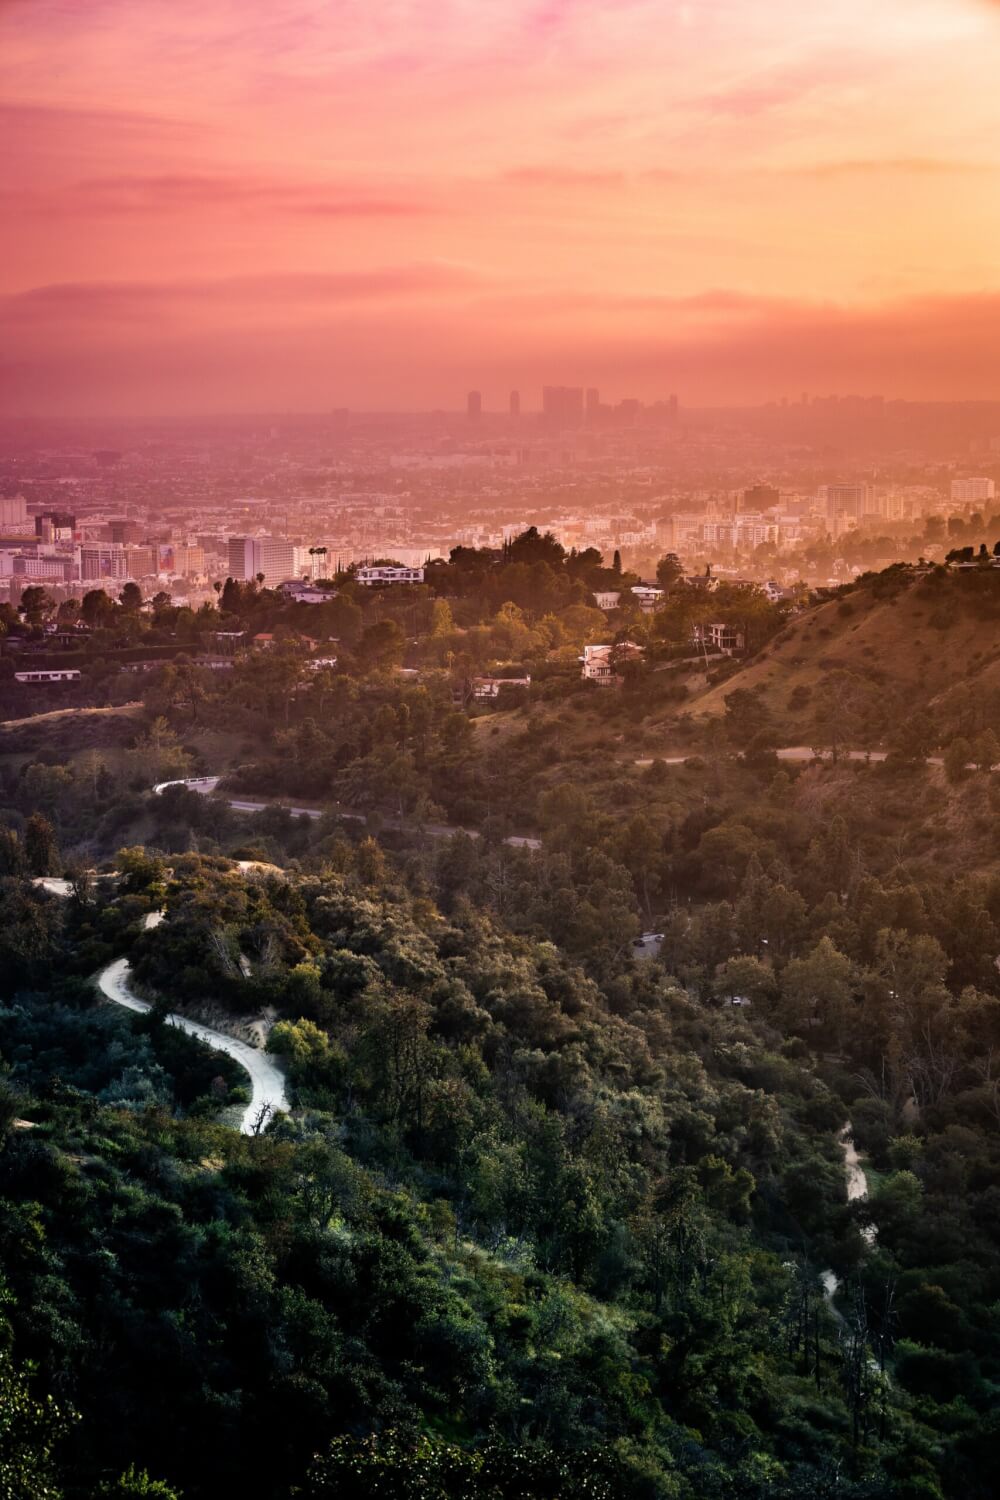 A view at dusk of the mountainous and hilly terrain with homes nestled in, roads carved through, and a cityscape in the background. These are prime habitats for mountain lions.